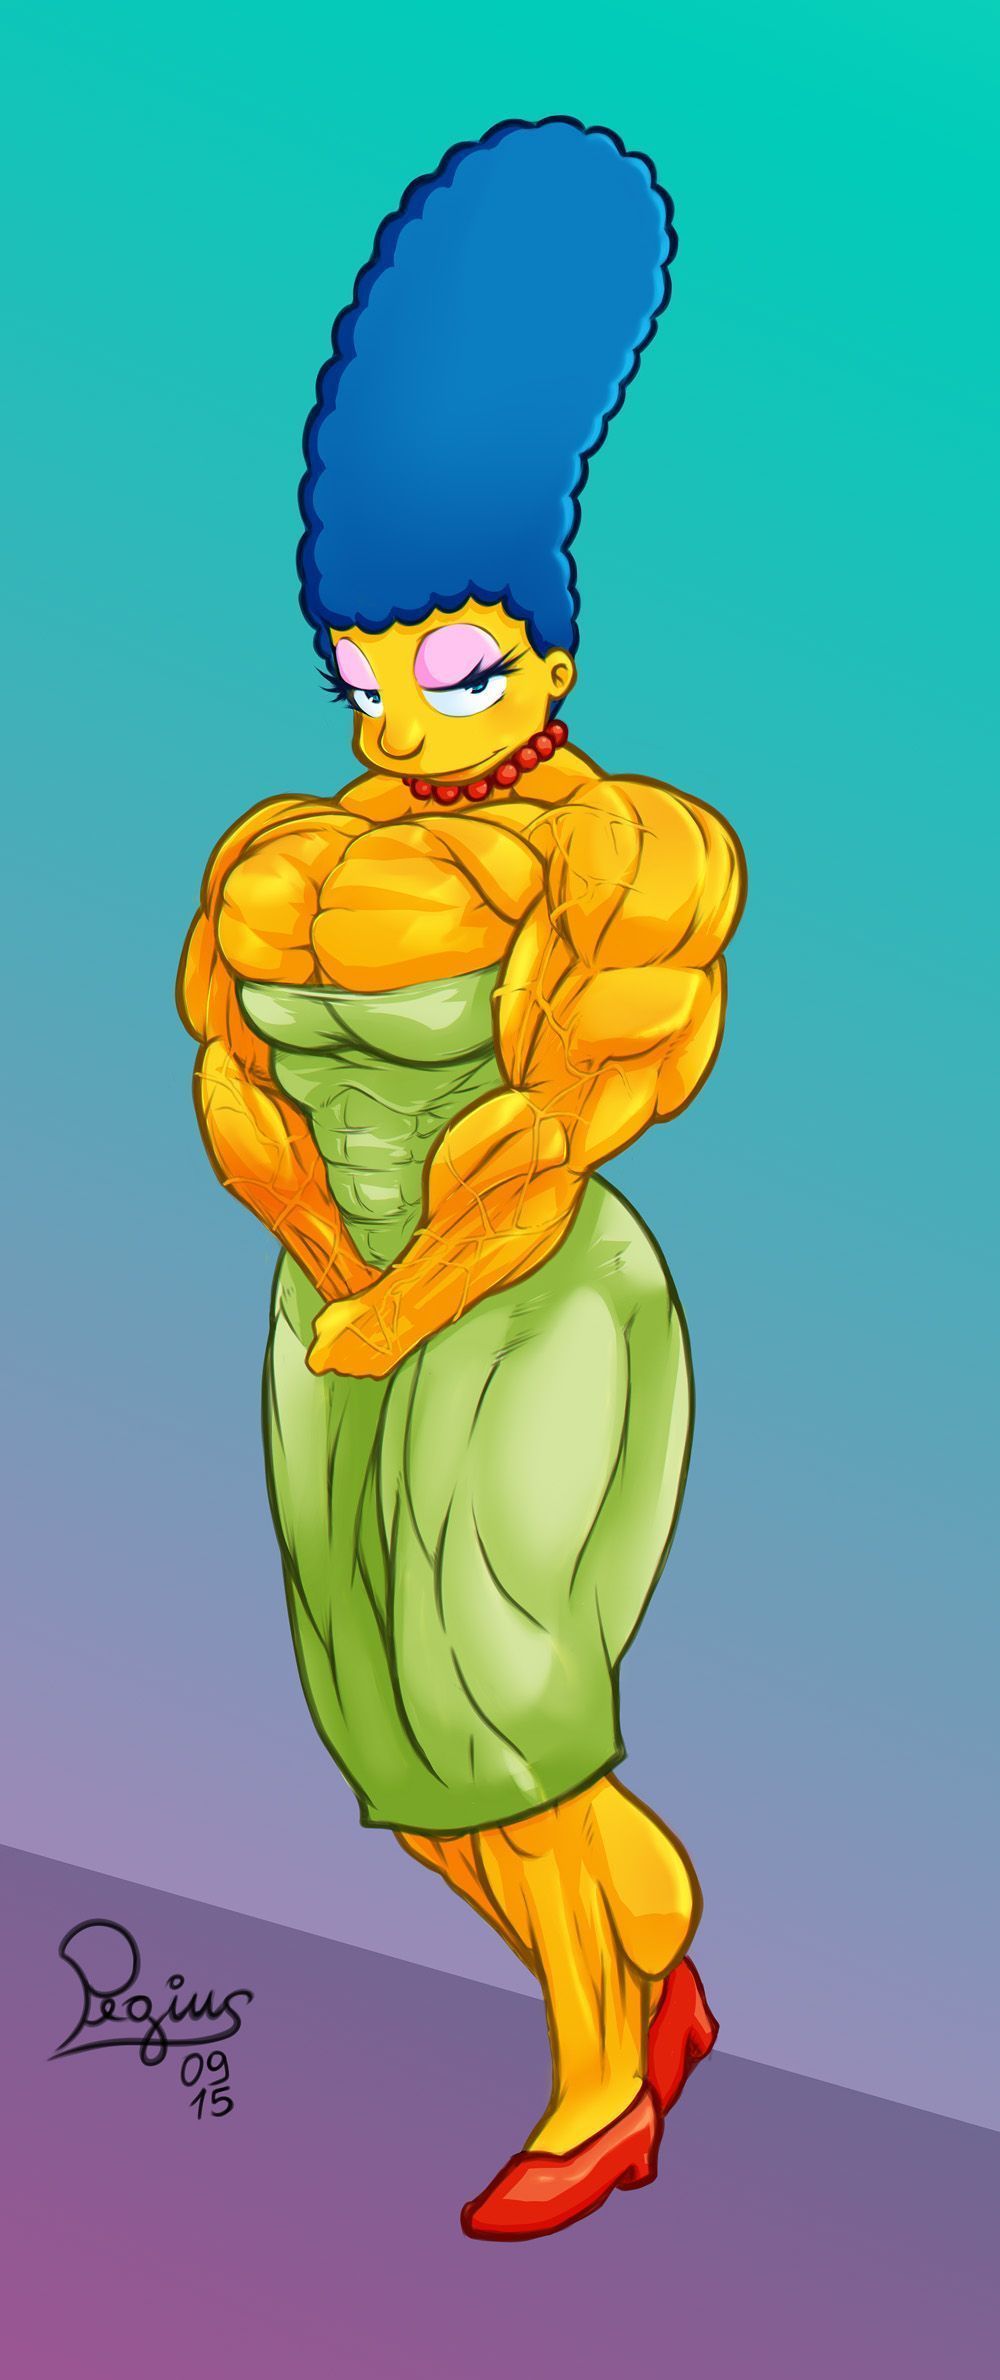 Marge simpson buff and naked